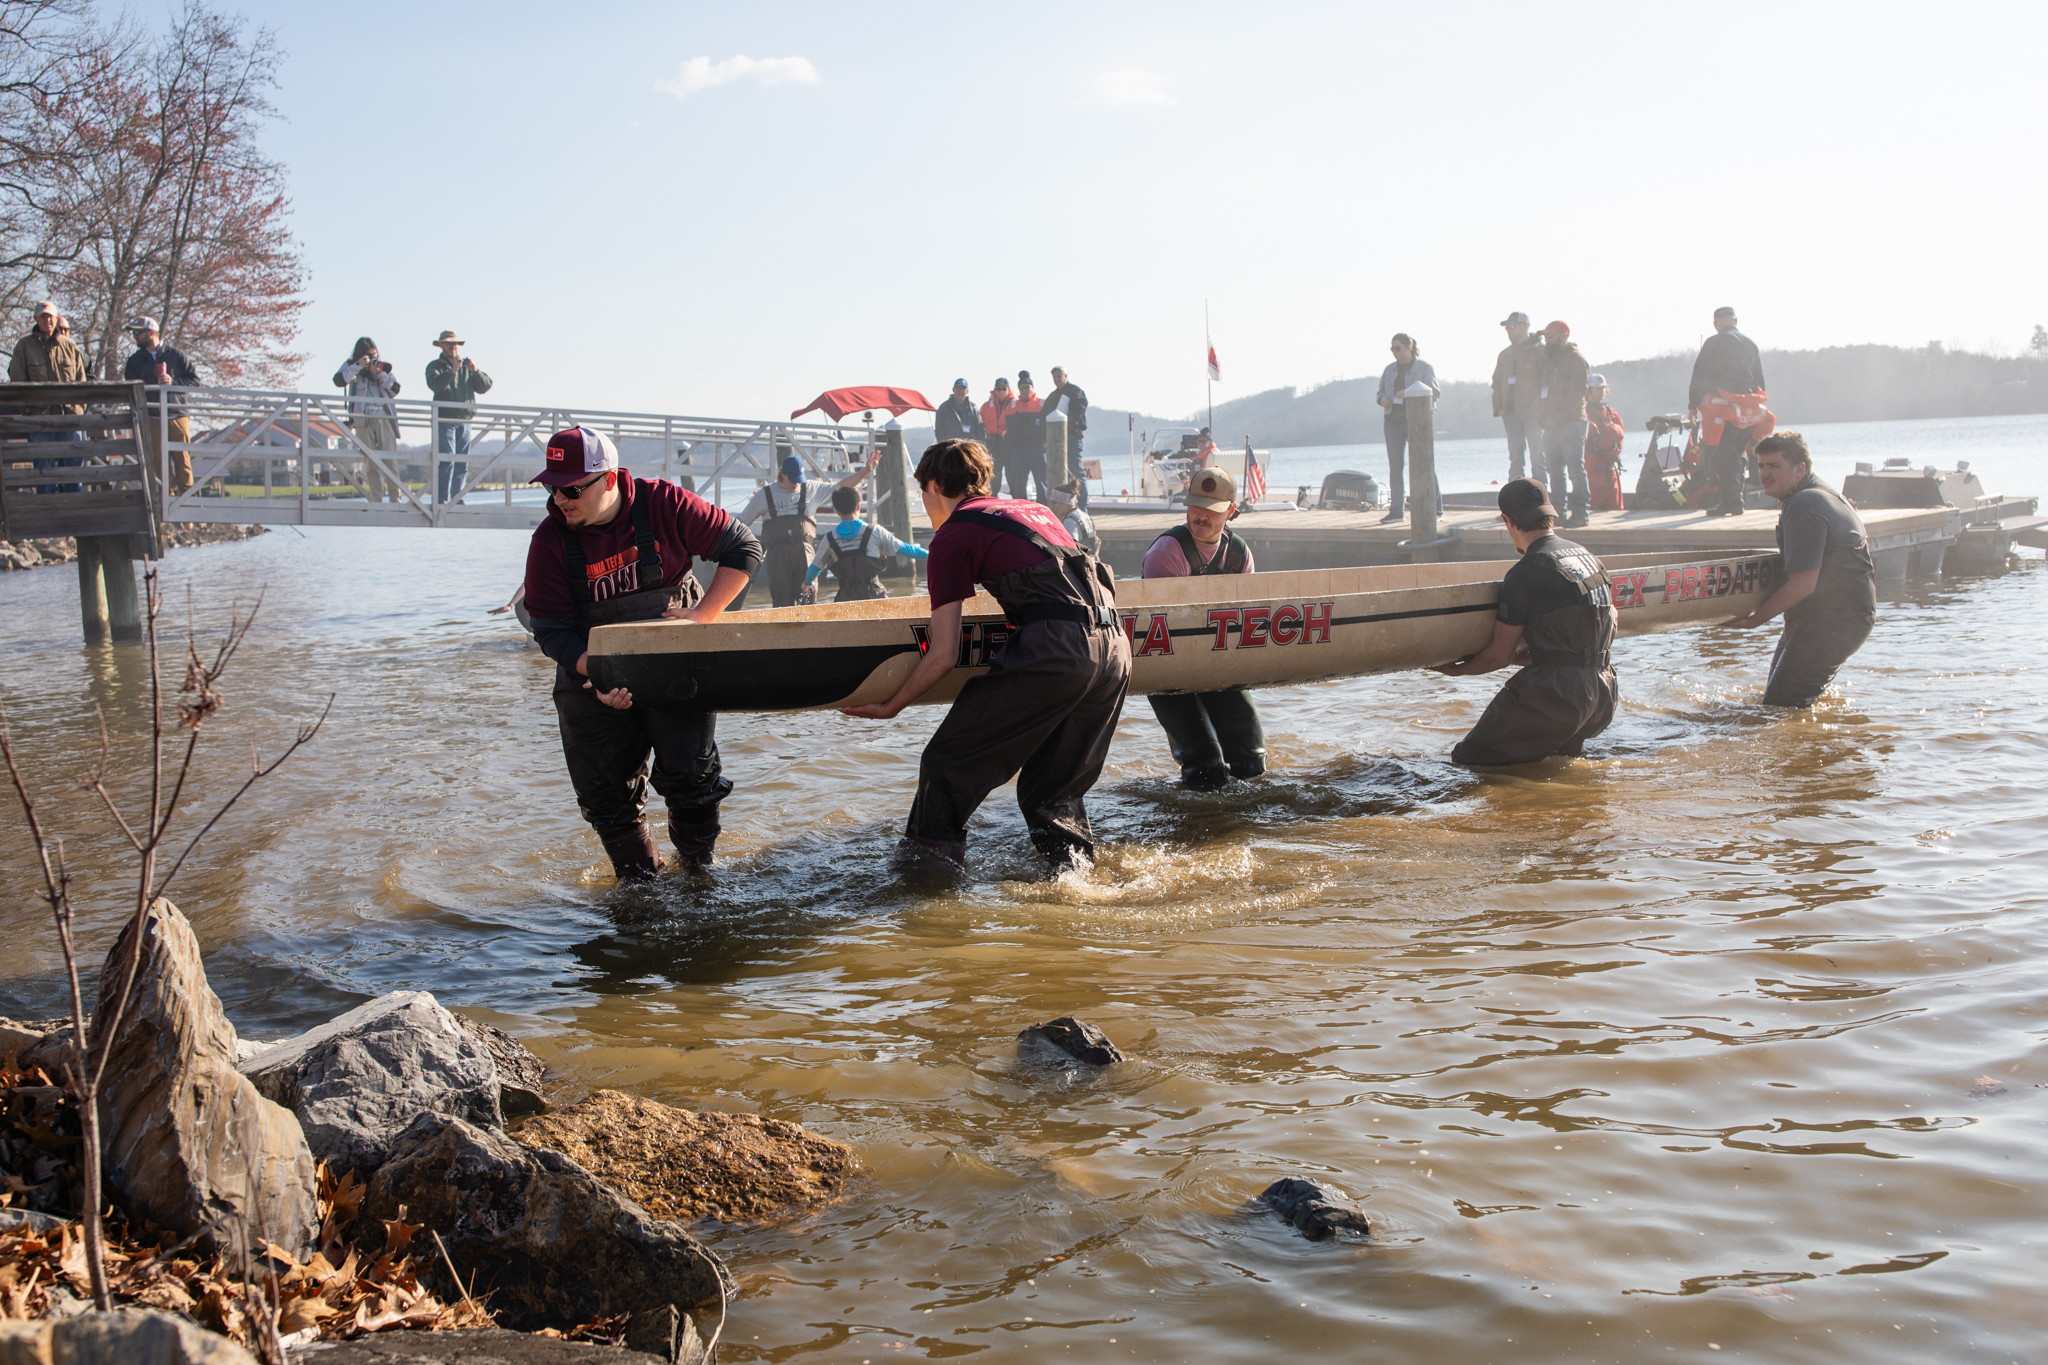 Team members lift the canoe out of the lake.